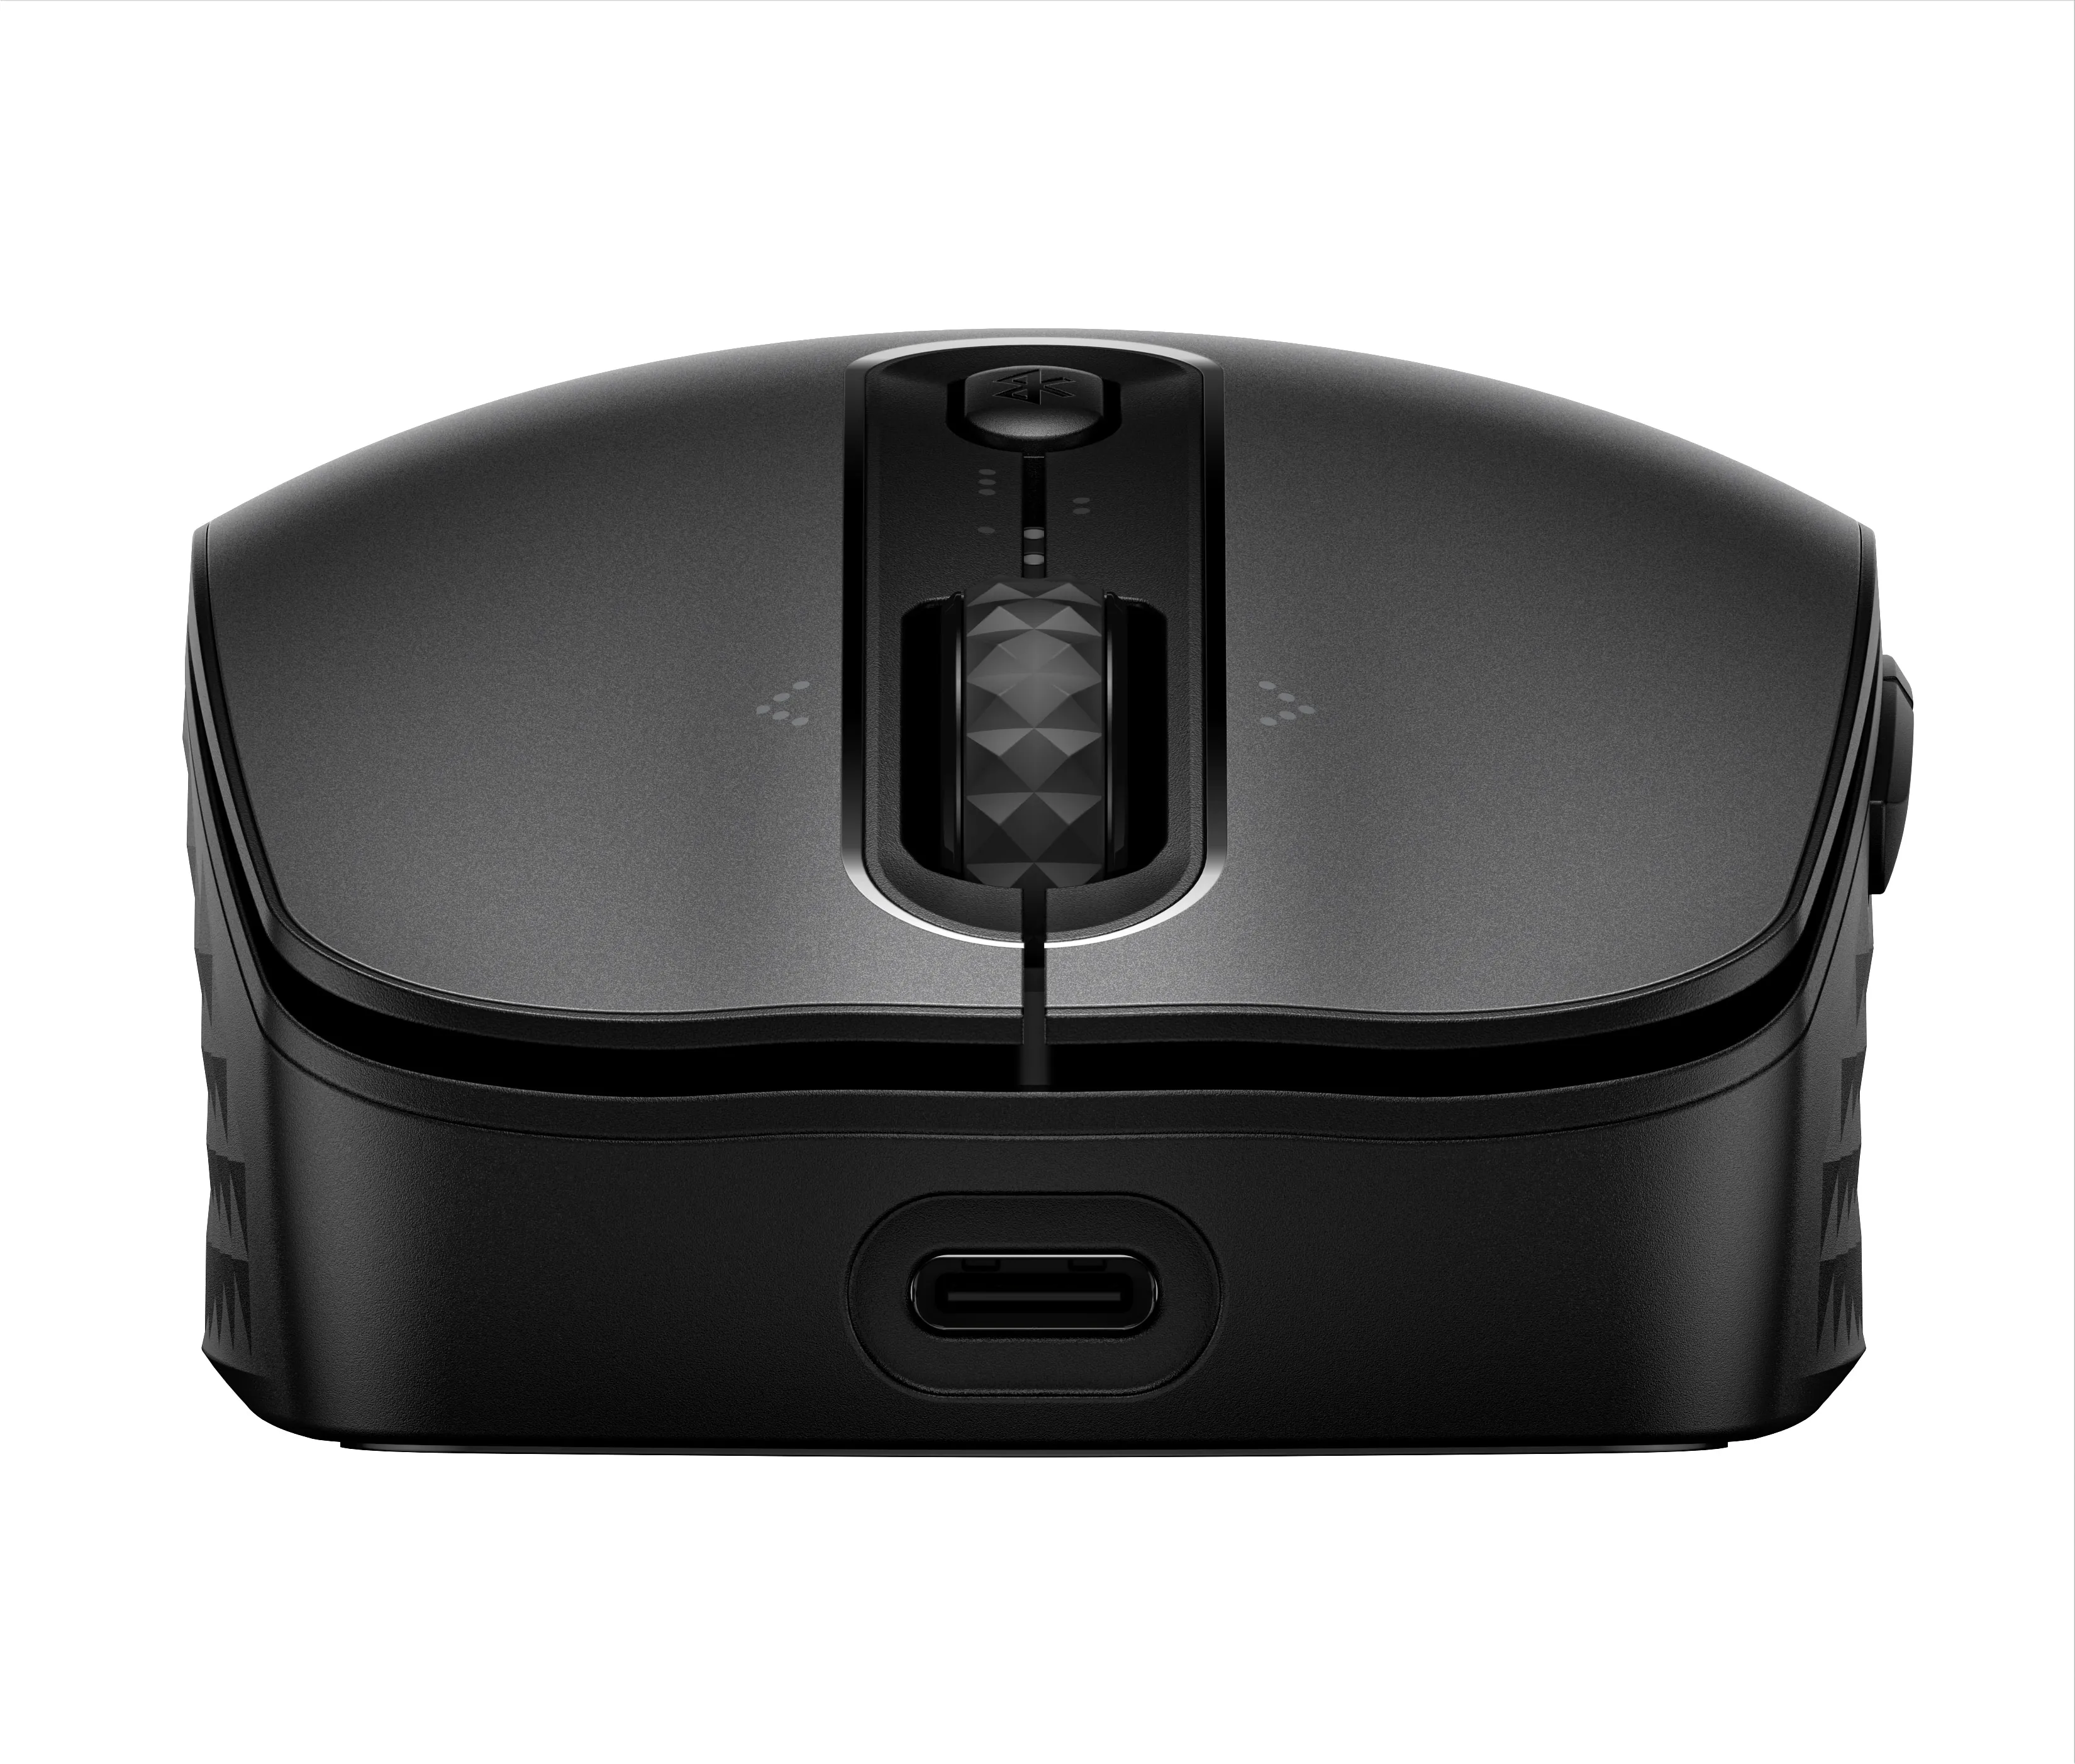 Vente Souris HP 695 Qi-Charging Wireless Mouse